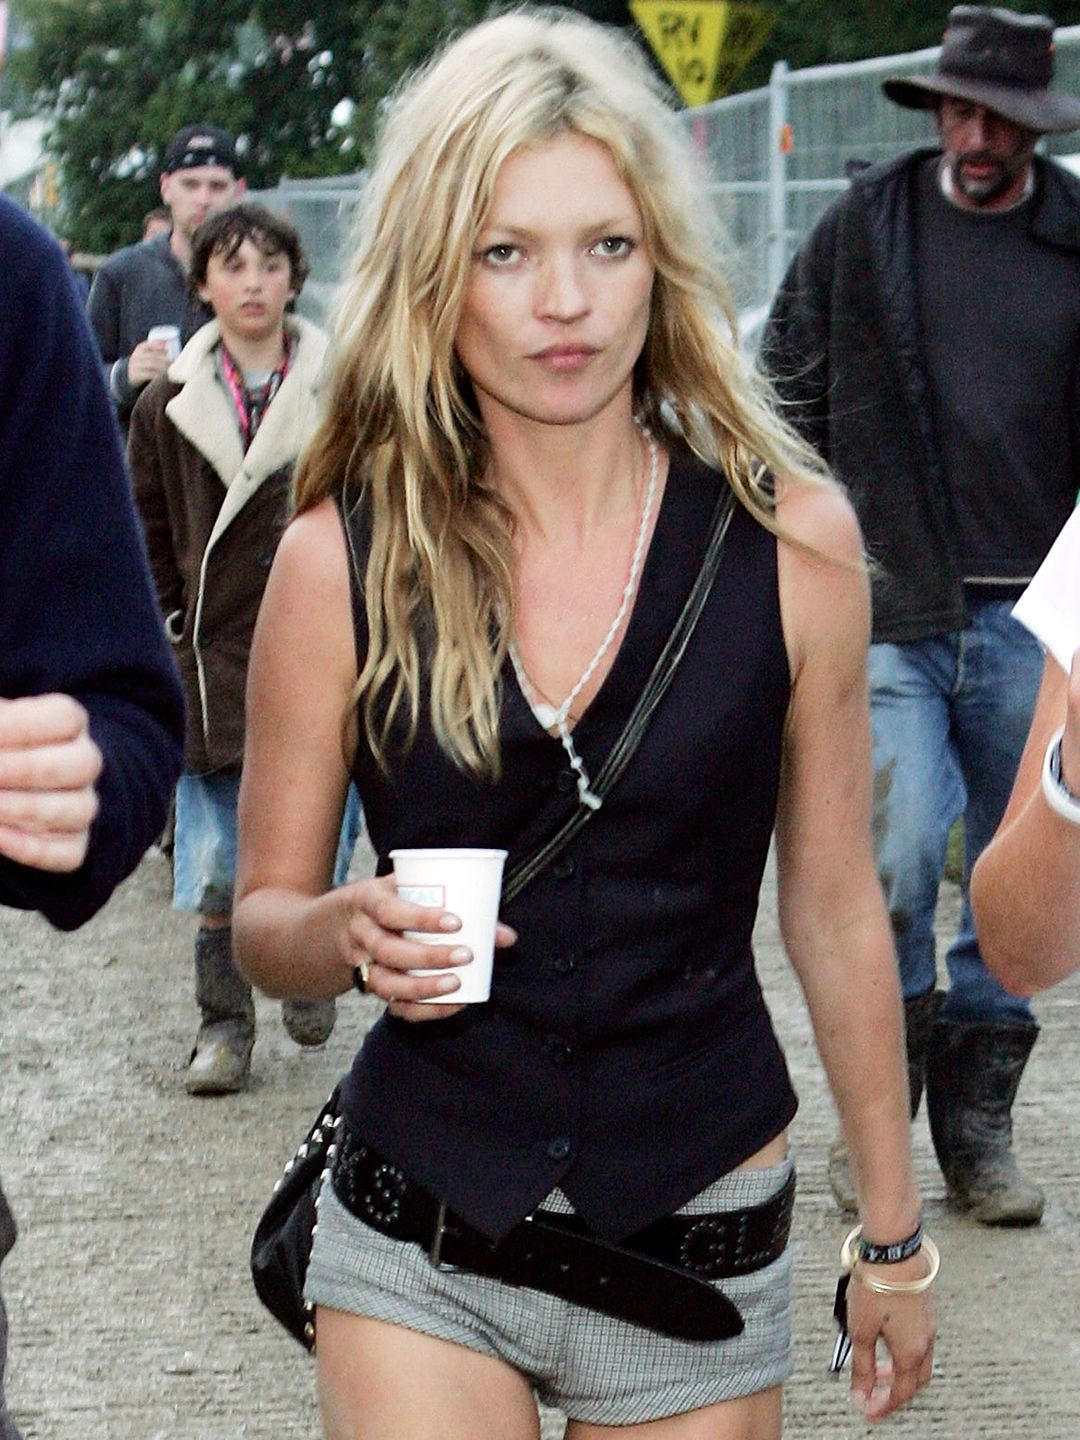 Kate Moss wearing wellies and shorts at Glastonbury